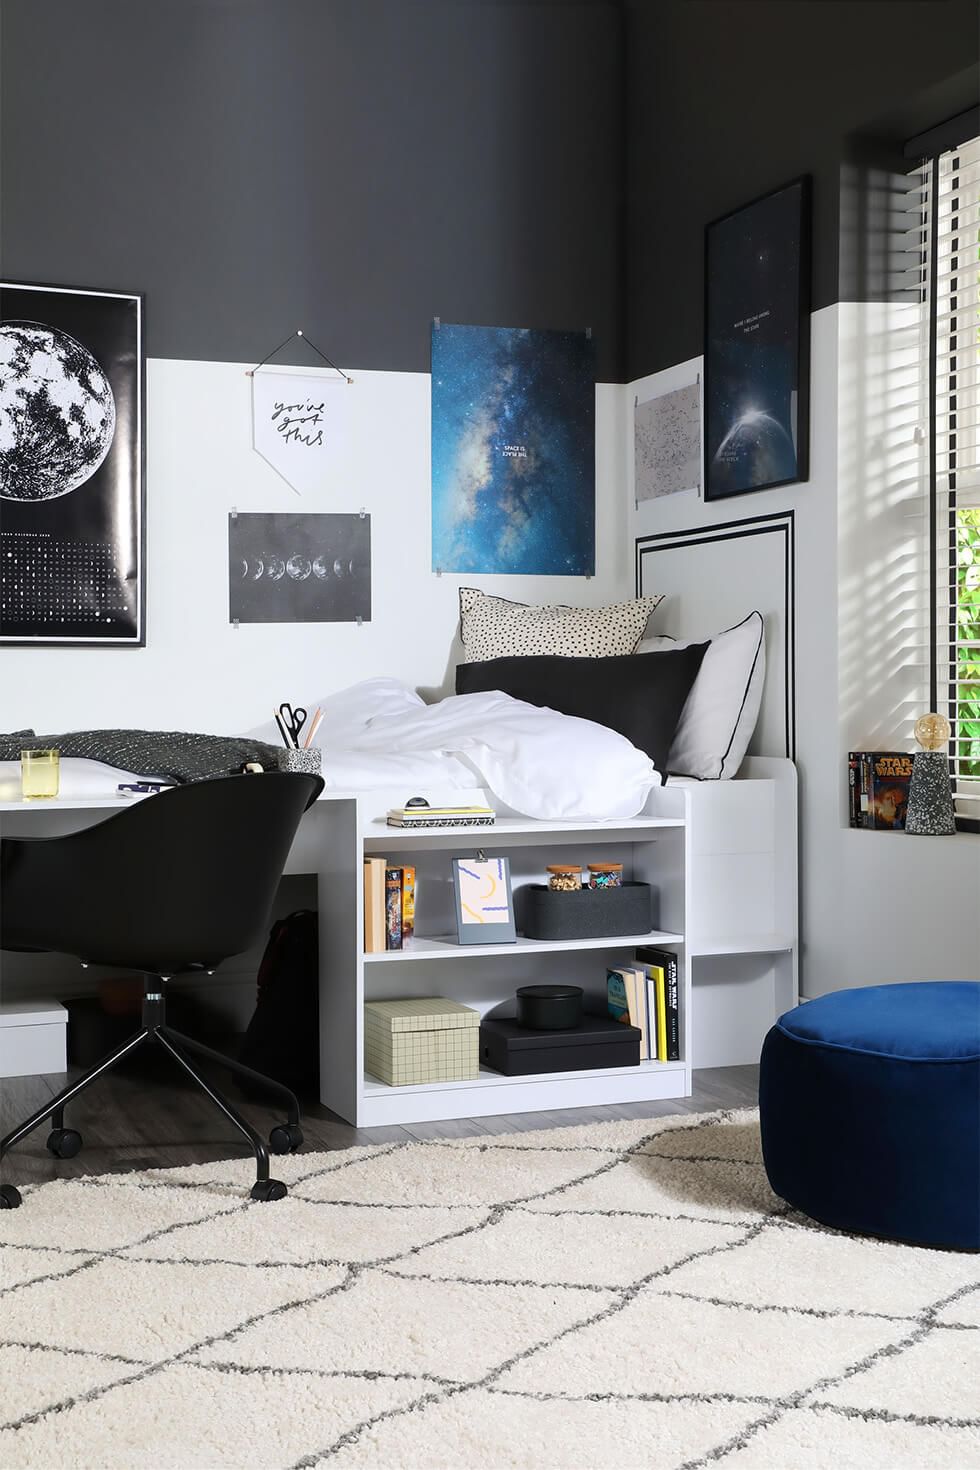 Shared bedroom with a storage bed and galaxy theme